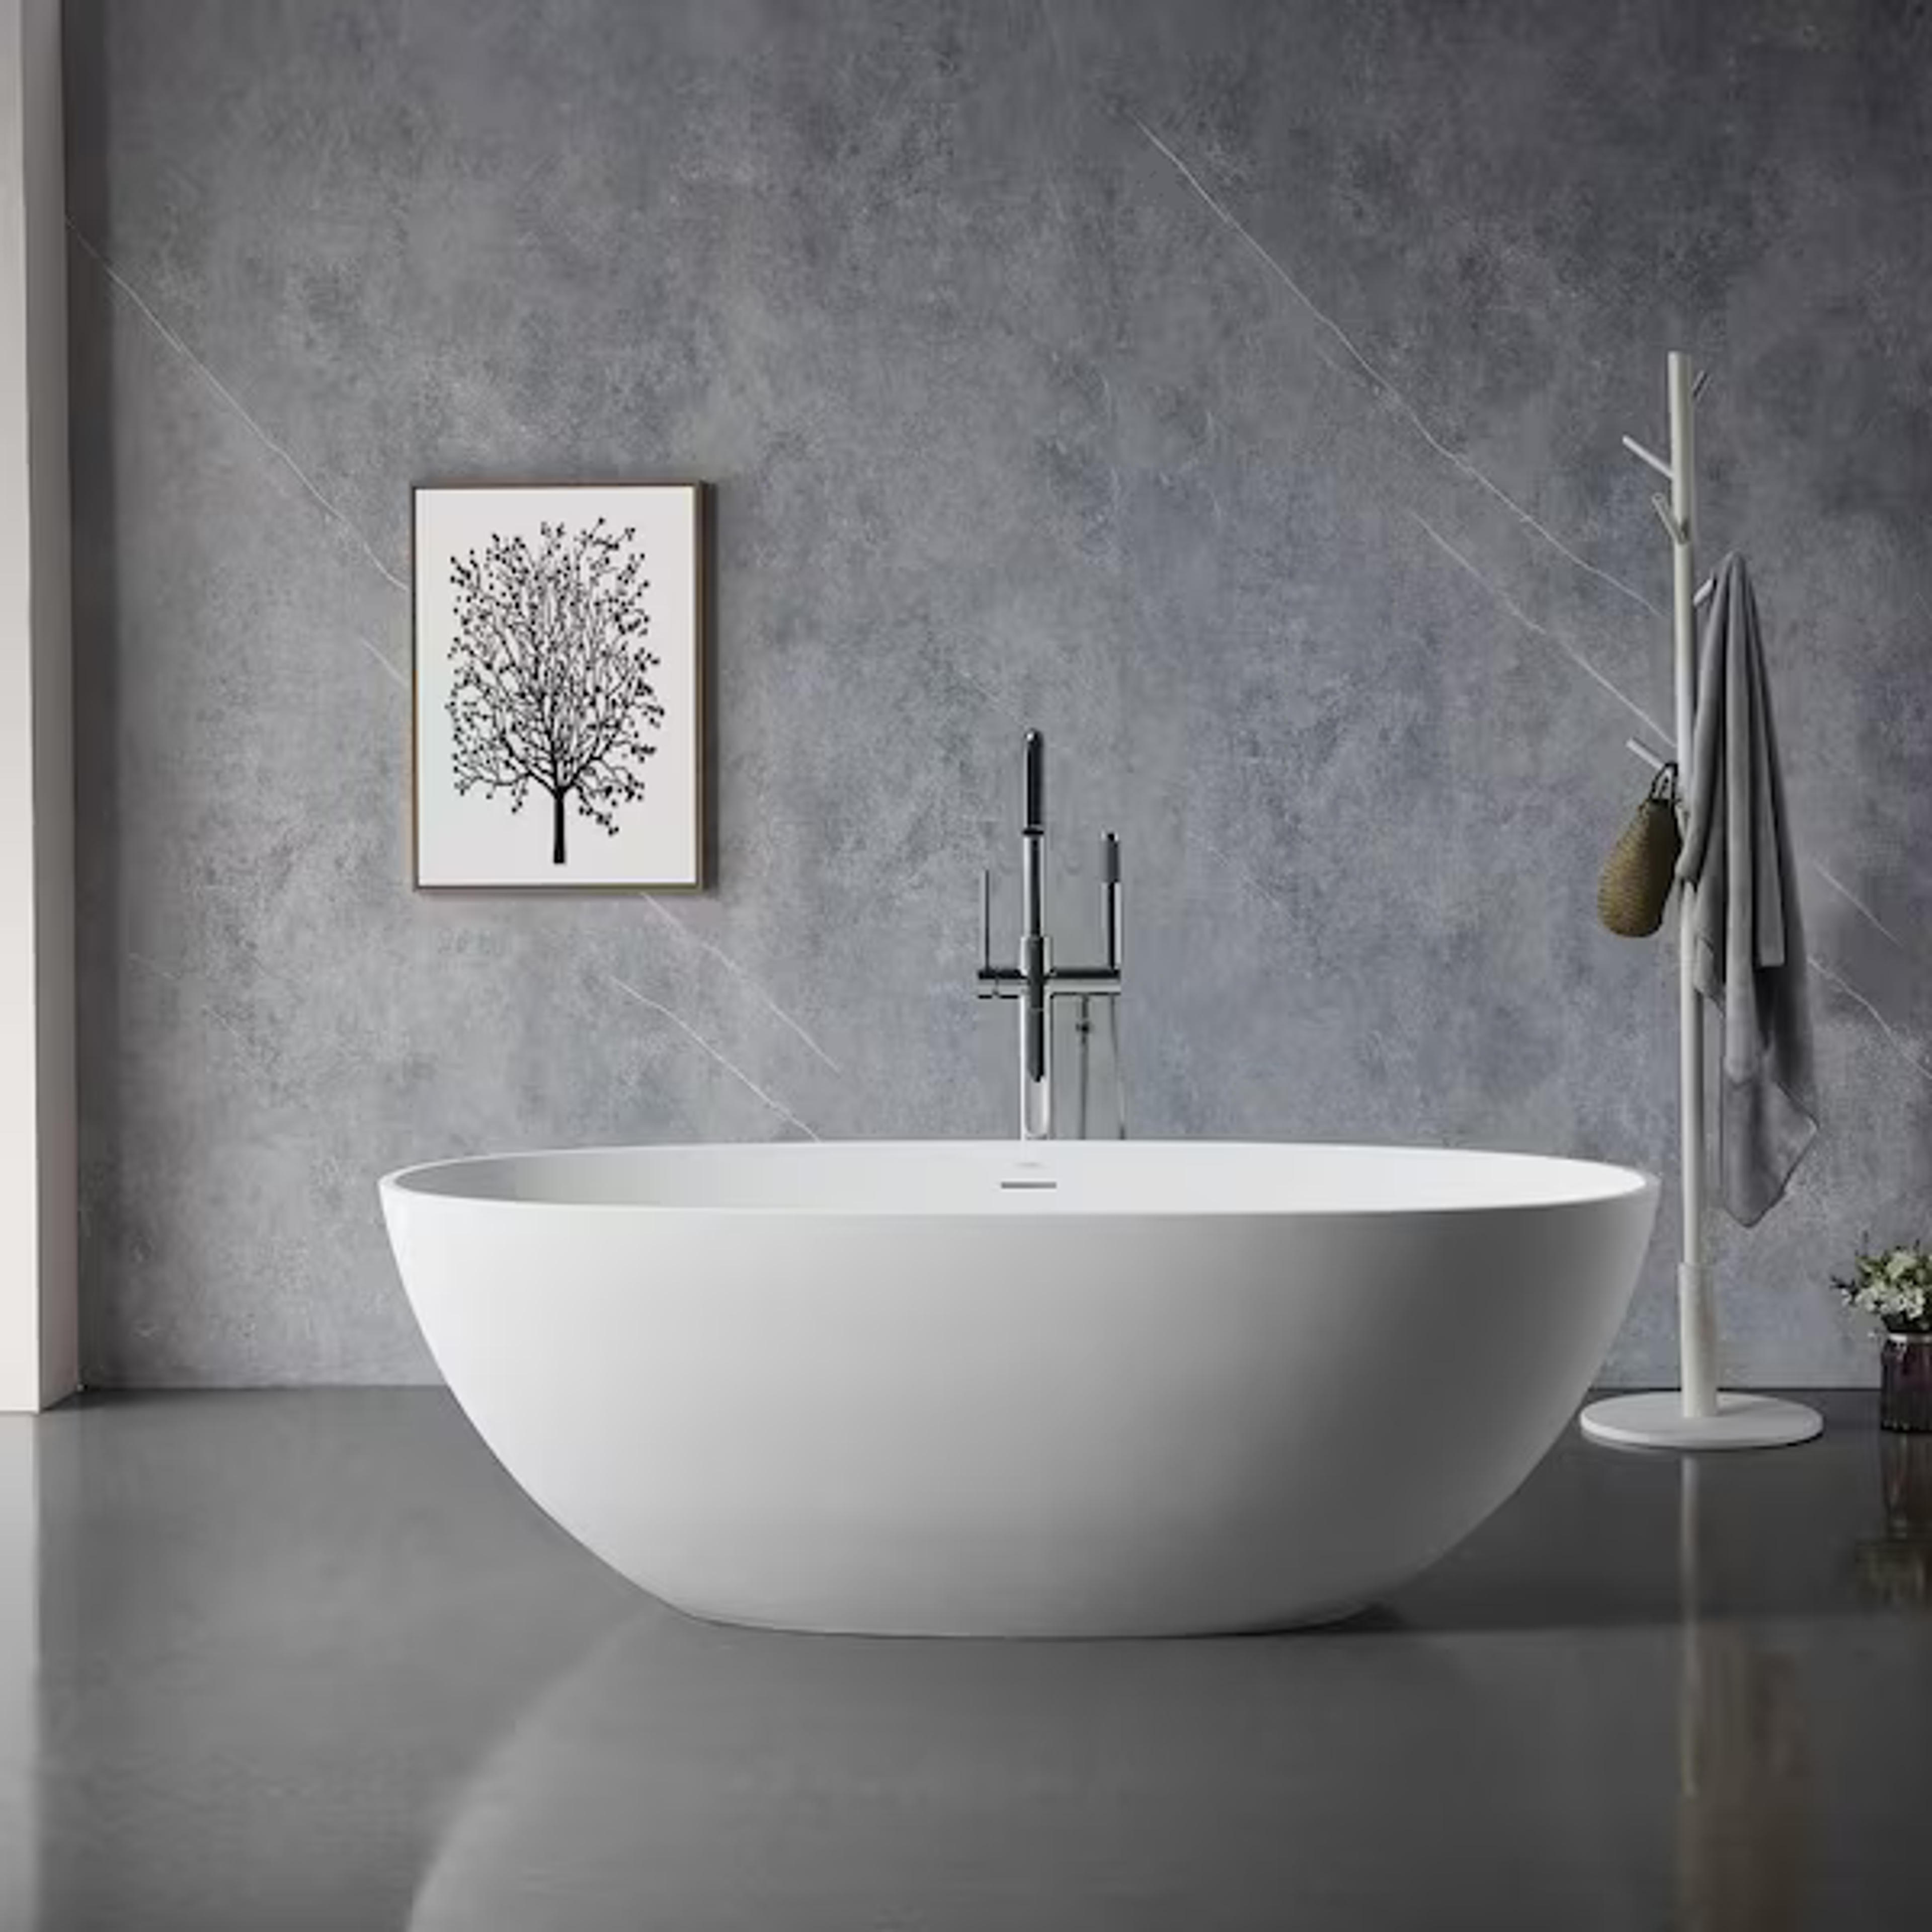 Xspracer Moray 65 in. x 30 in. Solid Surface Stone Resin Flatbottom Freestanding Double Slipper Soaking Bathtub in Matte White JH-W54326738 - The Home Depot